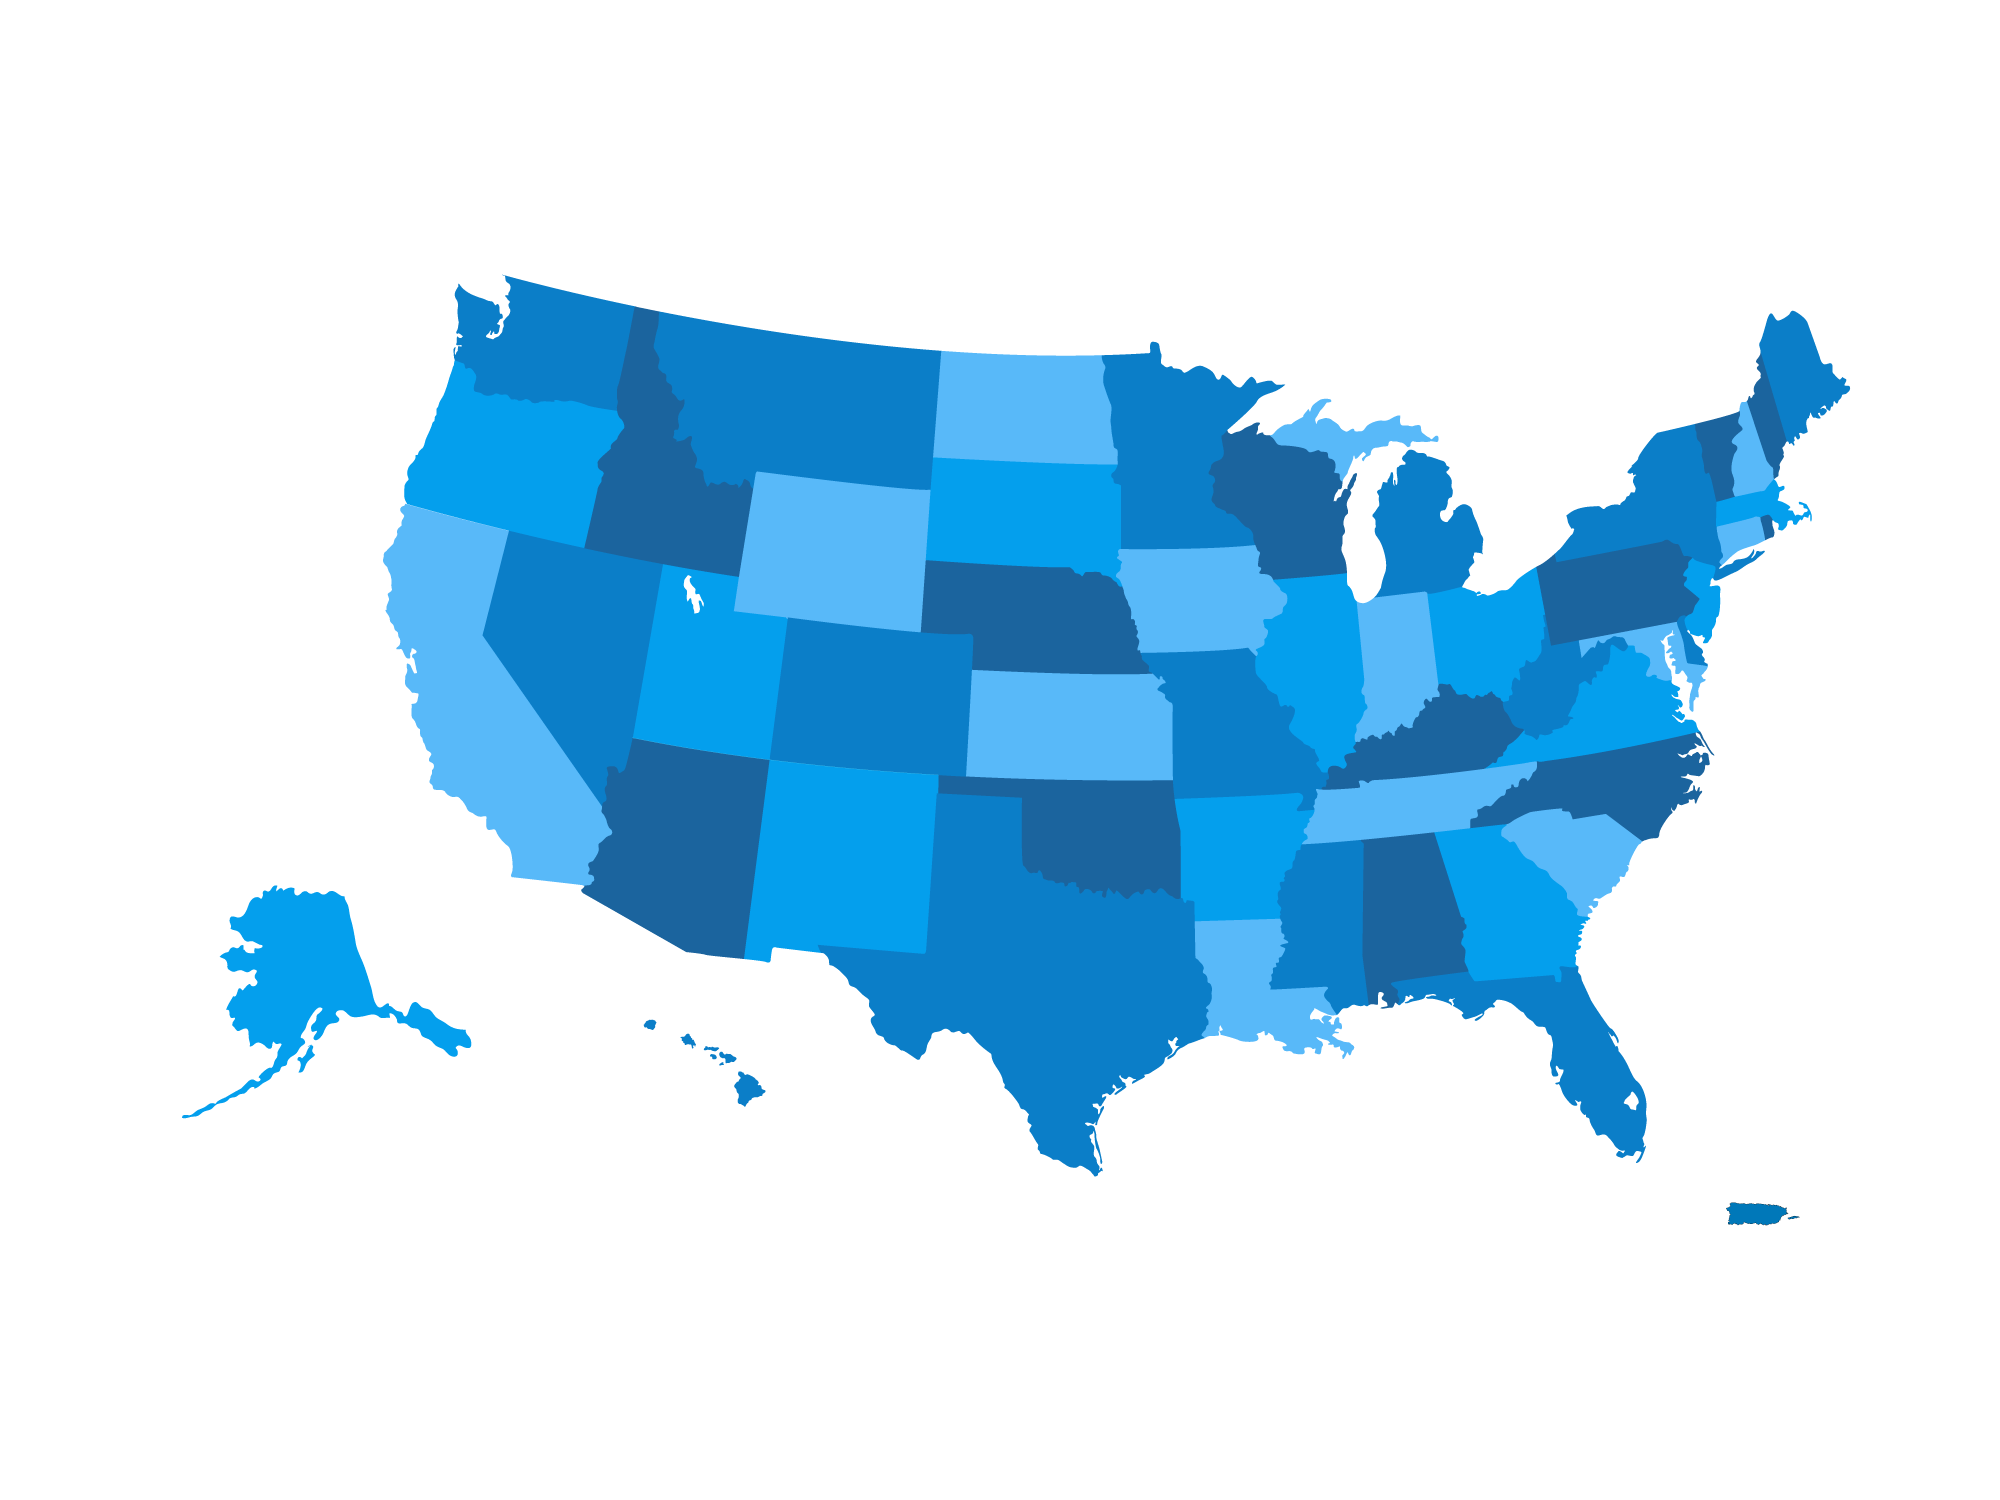 Illustrated Map of the United States including Puerto Rico in various shades of blue.